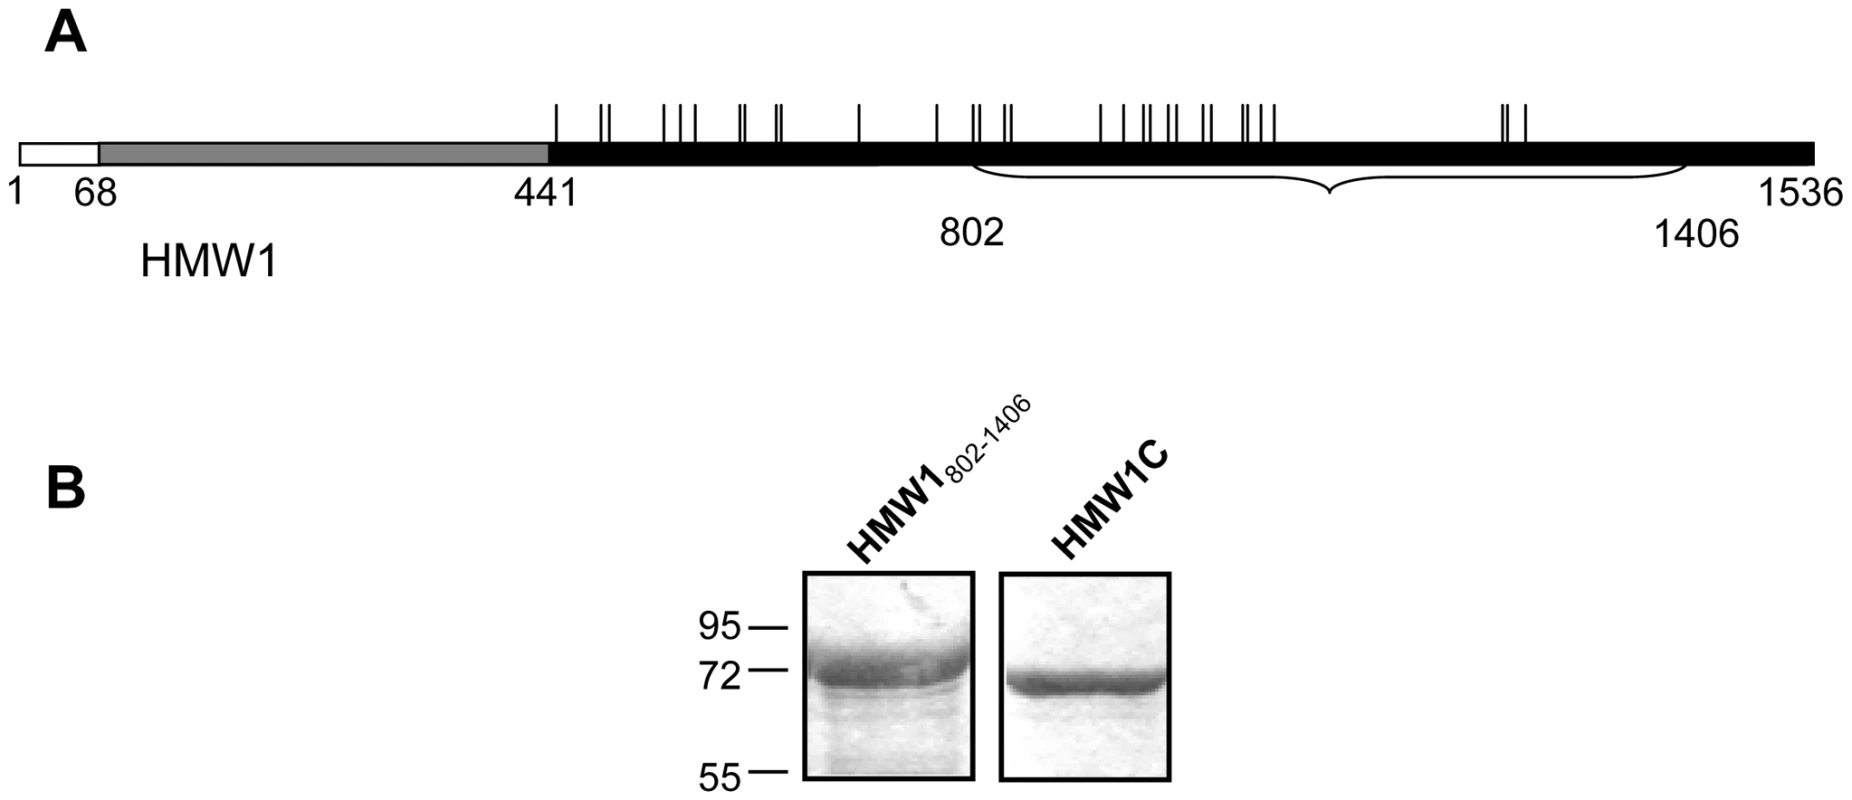 Purified proteins for examination of glycosylation of HMW1.